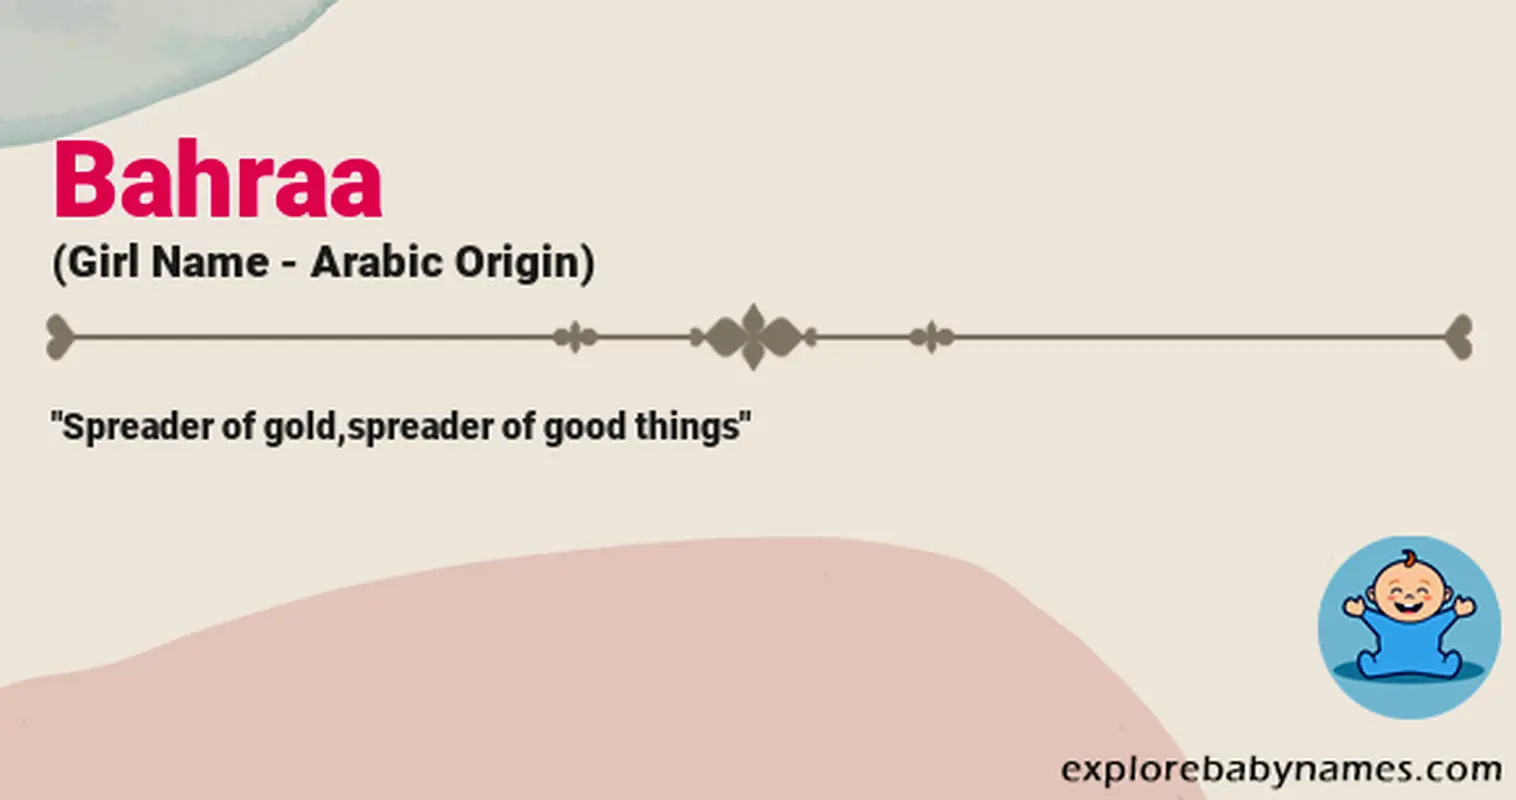 Meaning of Bahraa